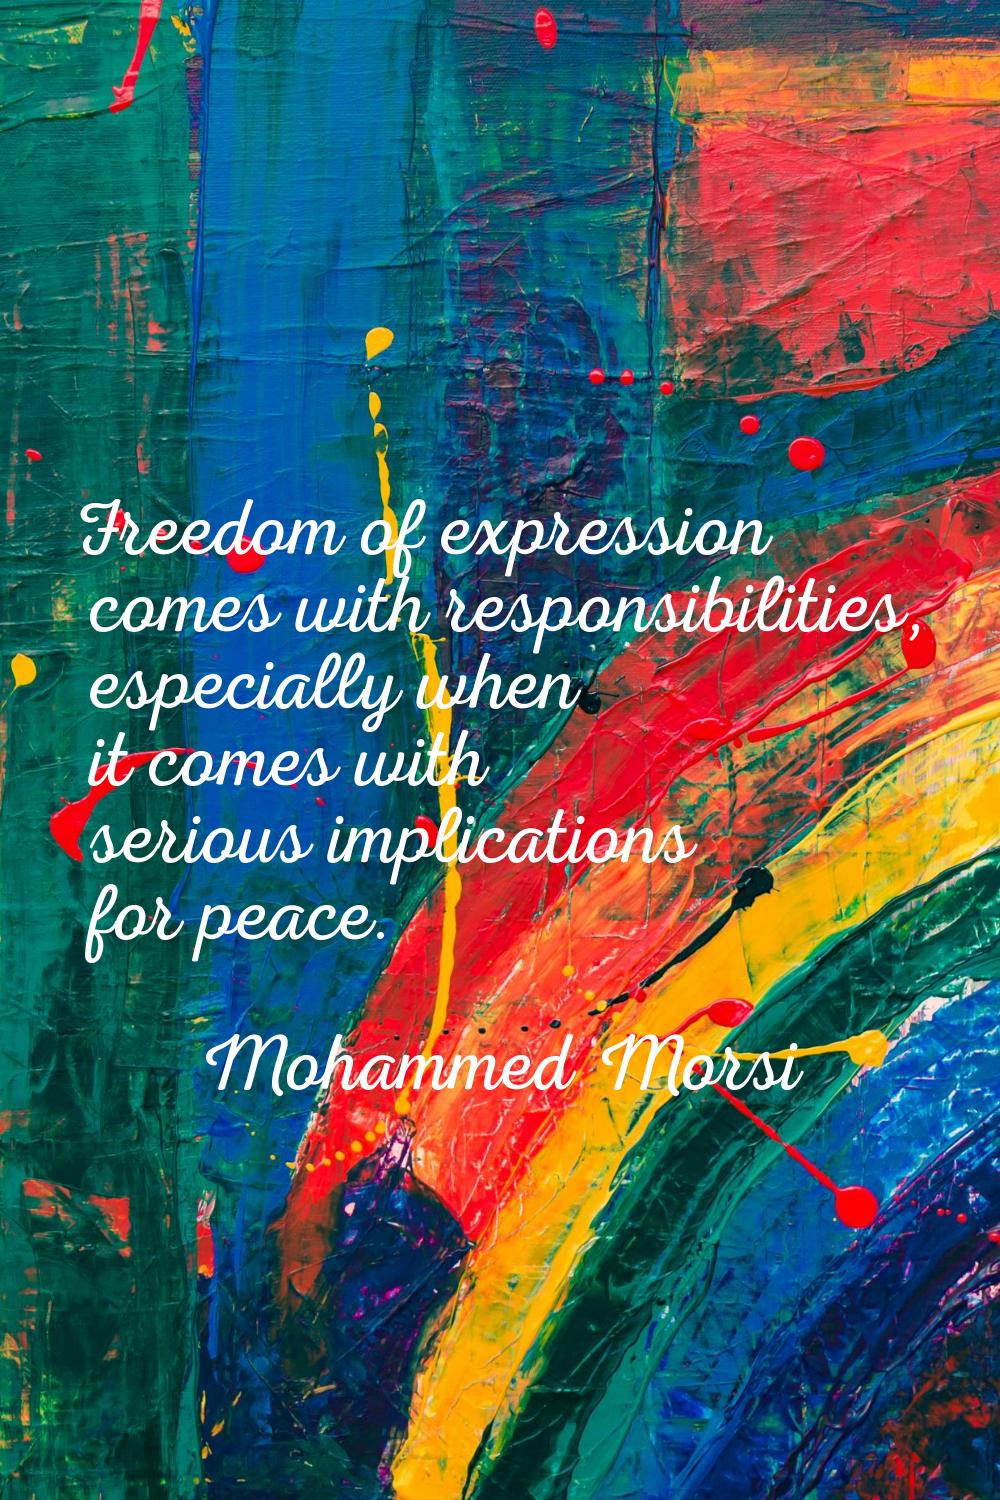 Freedom of expression comes with responsibilities, especially when it comes with serious implicatio